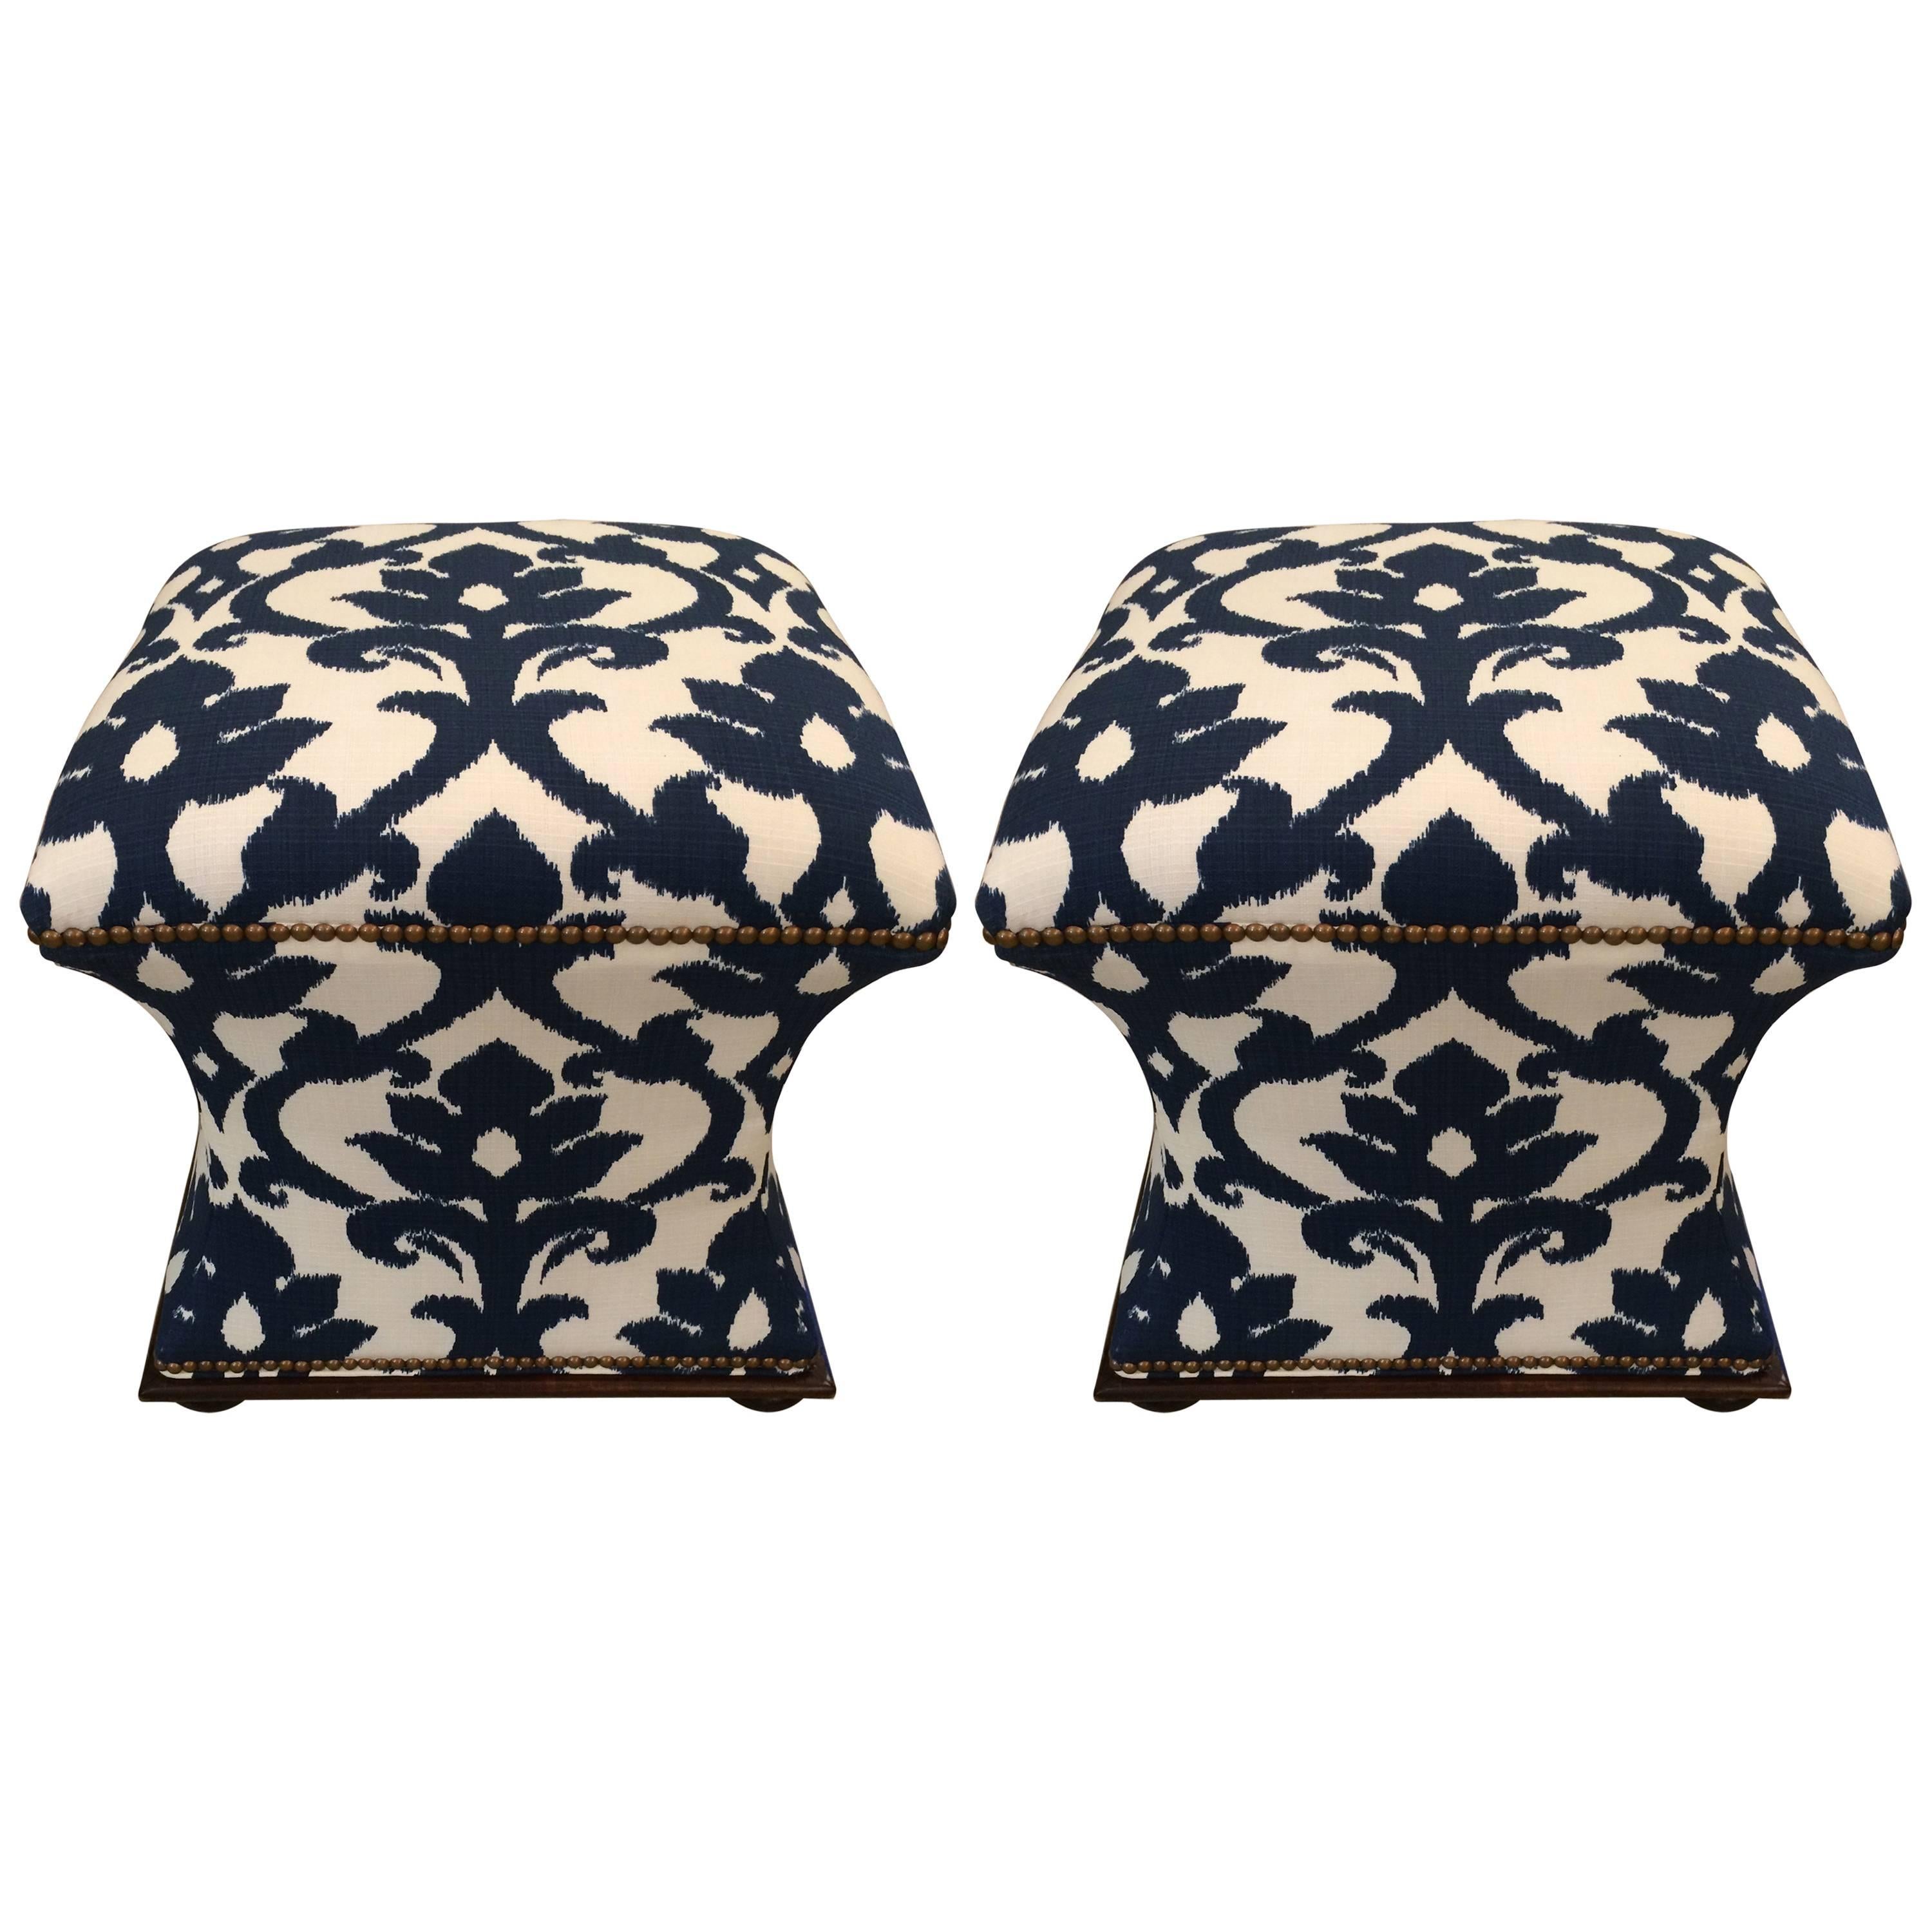 Stylish Pair of Hourglass Upholstered Ottoman Poufs